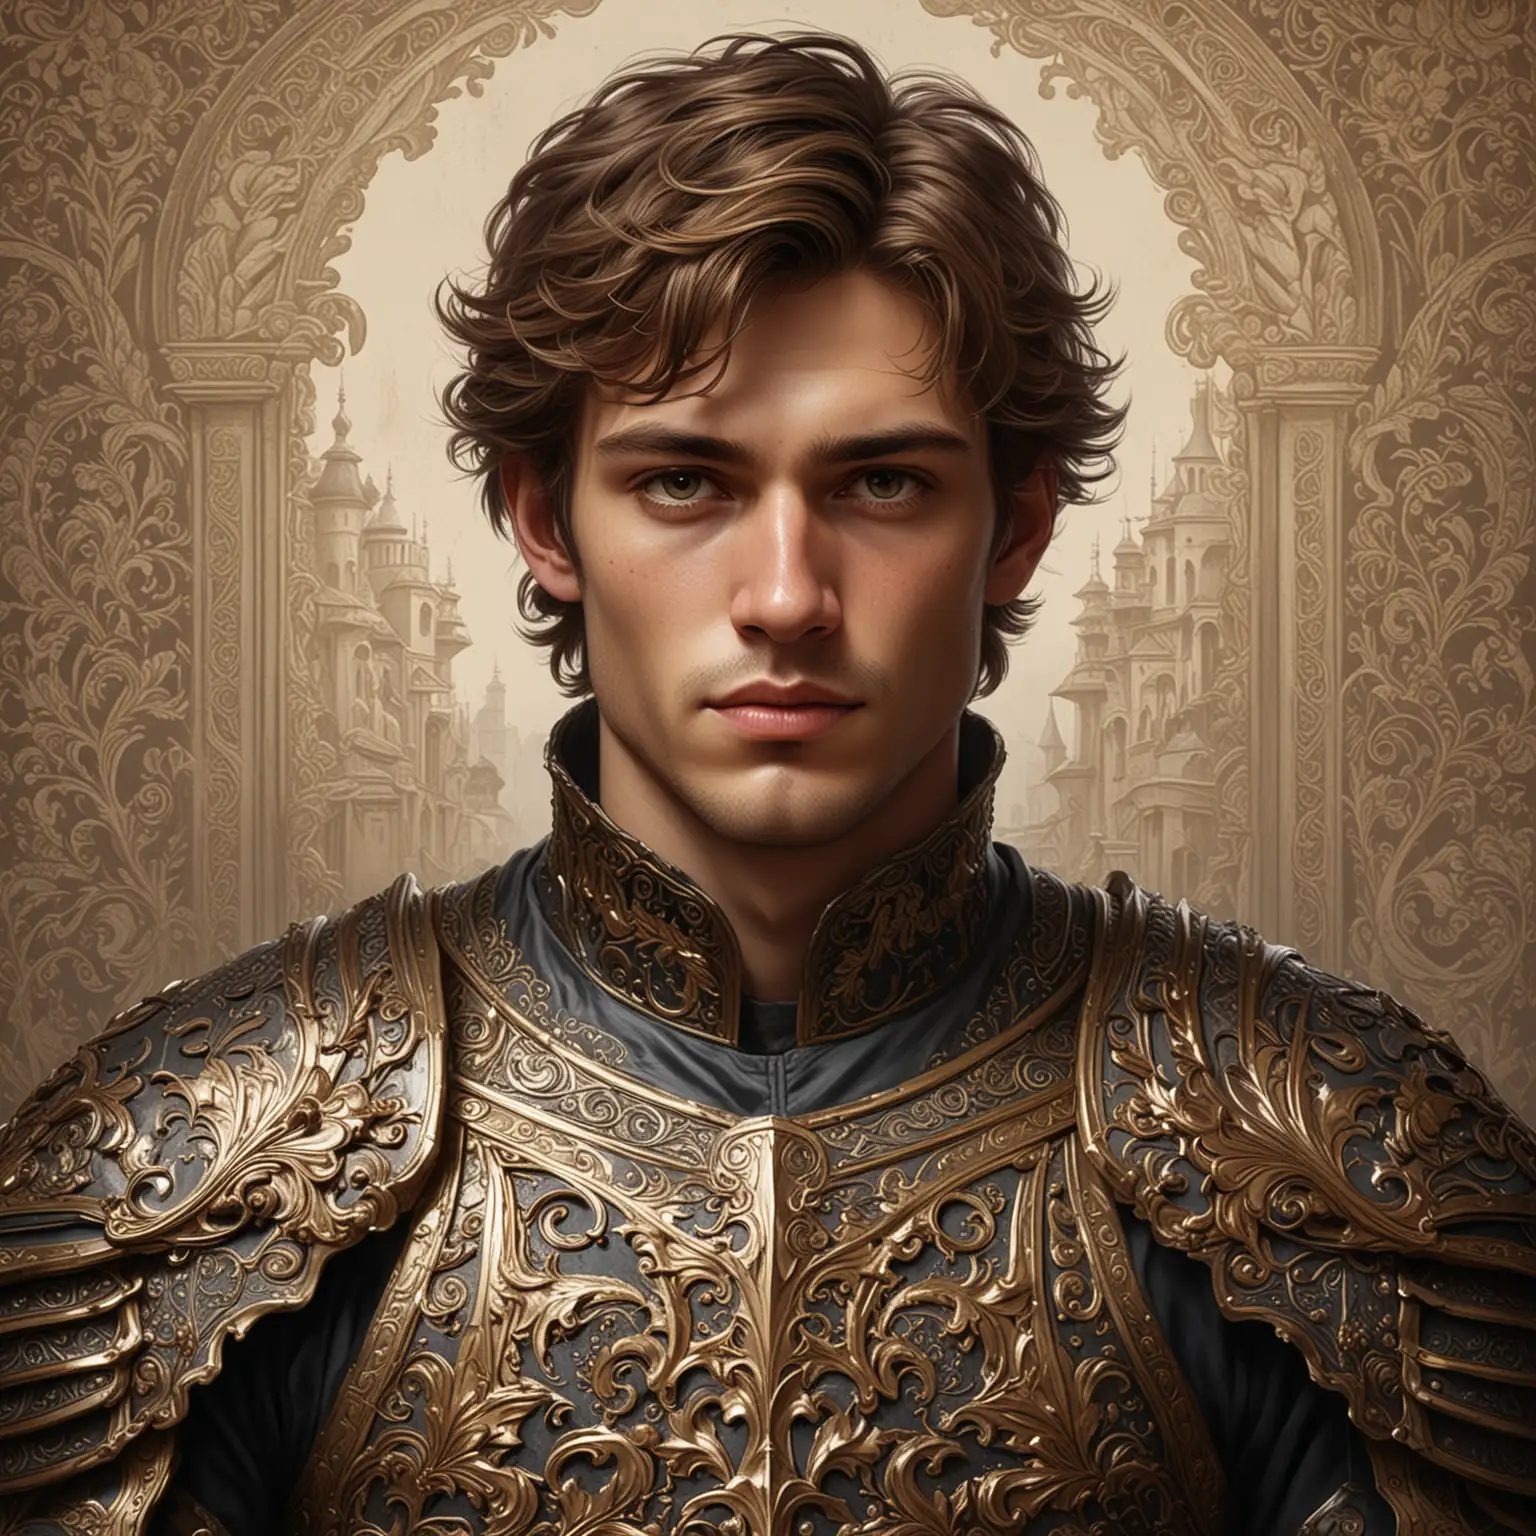 The image is a stylized portrait of a young man with a confident and noble expression. He has tousled, wavy brown hair that frames his face, with a few loose strands adding a casual touch to his otherwise refined appearance. His facial features are sharp and well-defined, with high cheekbones, a straight nose, and a strong jawline. His eyes are dark and expressive, exuding a sense of determination and calm.

He is dressed in an ornate, medieval-style armor with intricate golden engravings. The armor covers his shoulders and chest, featuring elaborate patterns and designs that highlight its craftsmanship. Beneath the armor, he wears a black garment that adds contrast to the golden tones of the metal. The background is plain white, putting the focus entirely on the subject.

His posture is upright and poised, with his head slightly turned to the side, suggesting a moment of contemplation or readiness. The overall style of the illustration combines realistic and slightly exaggerated elements, giving it a heroic and timeless quality.